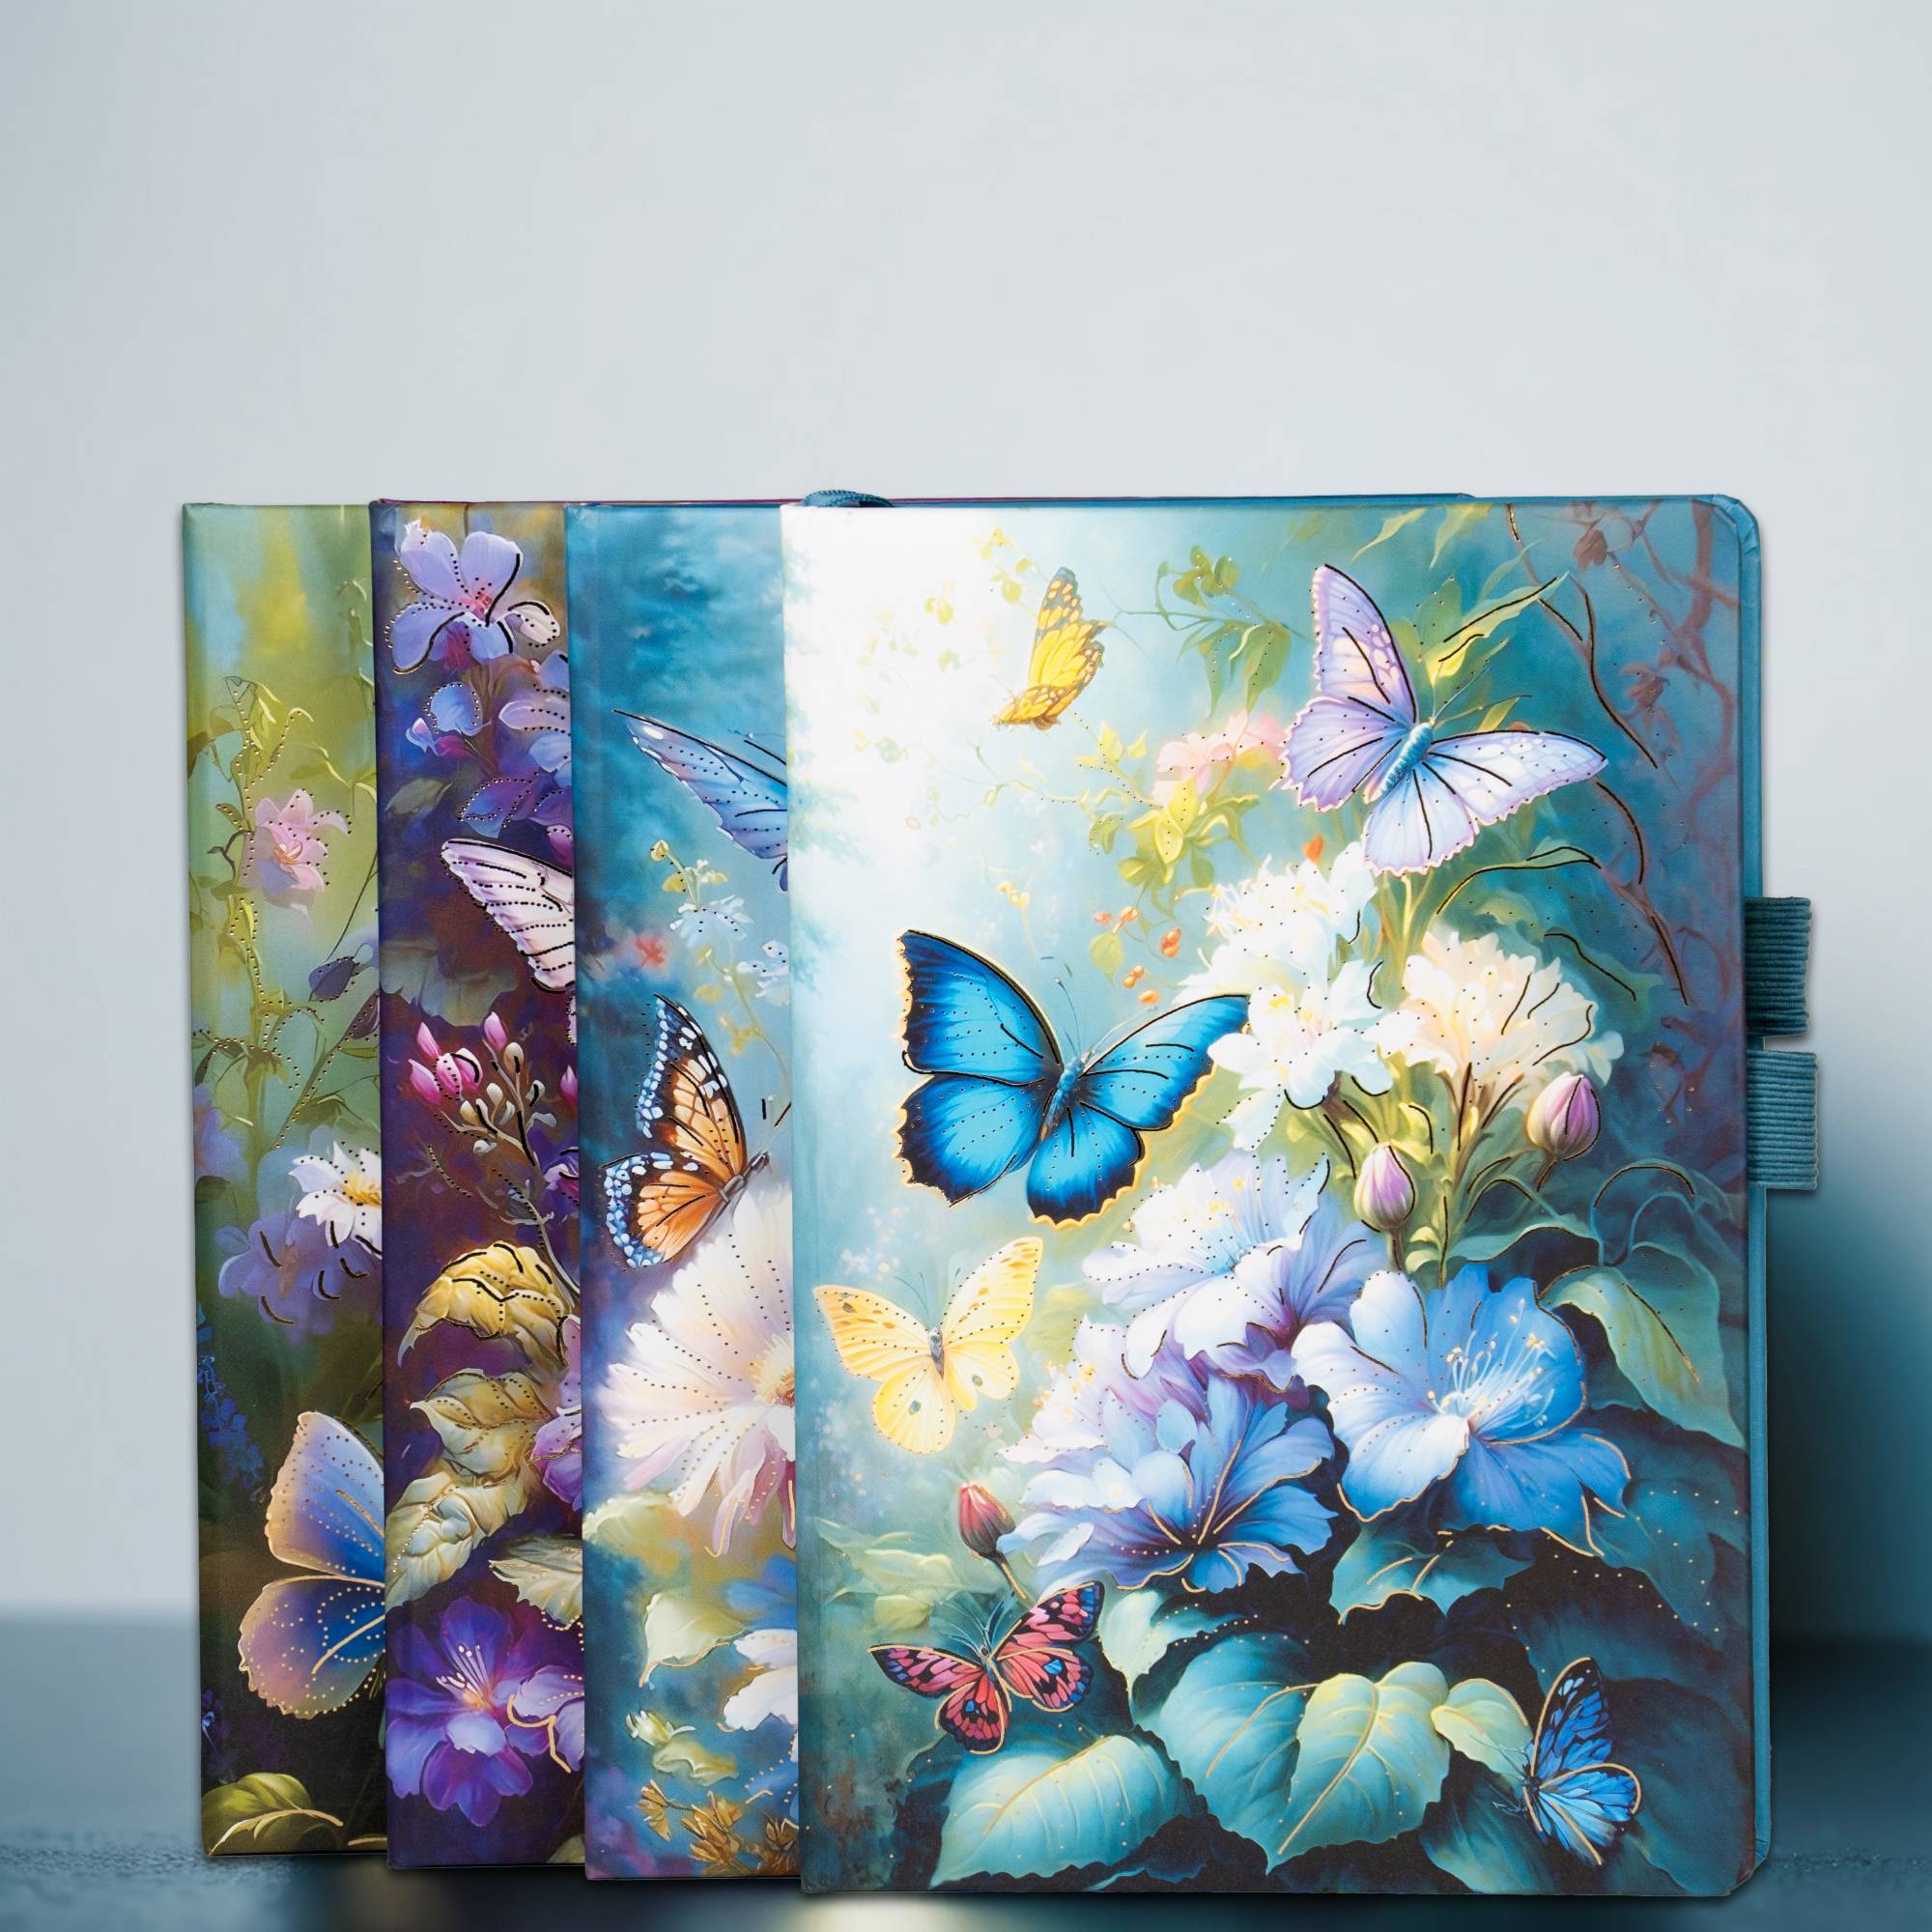 

Butterfly & Floral A5 Journal - 80gsm Thick Ruled Paper, Ideal For School & Office Supplies, Perfect Gift For Teens